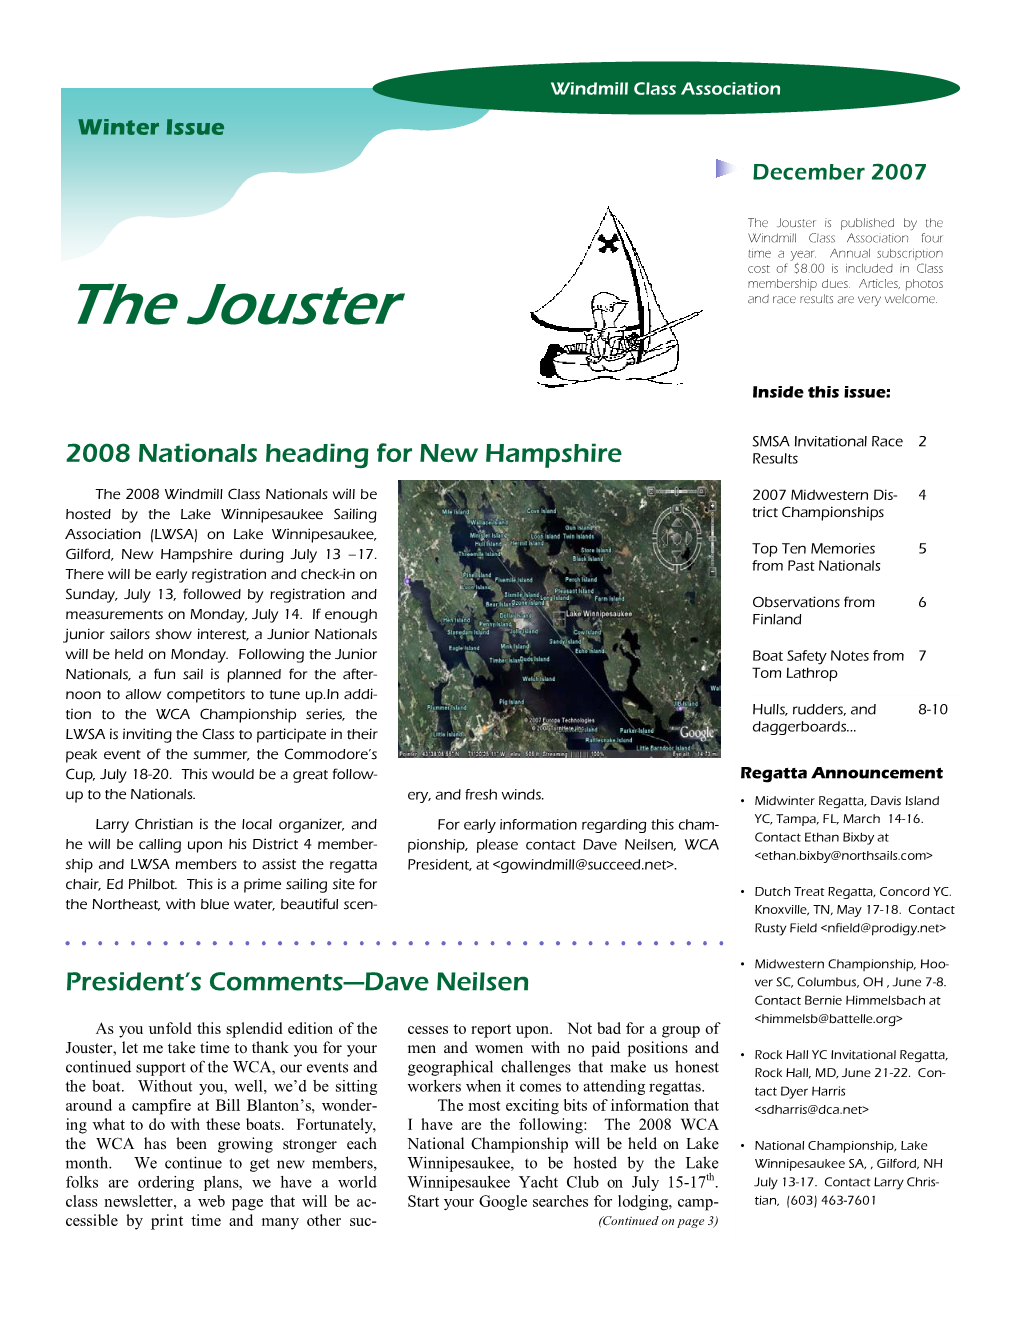 The Jouster Is Published by the Windmill Class Association Four Time a Year